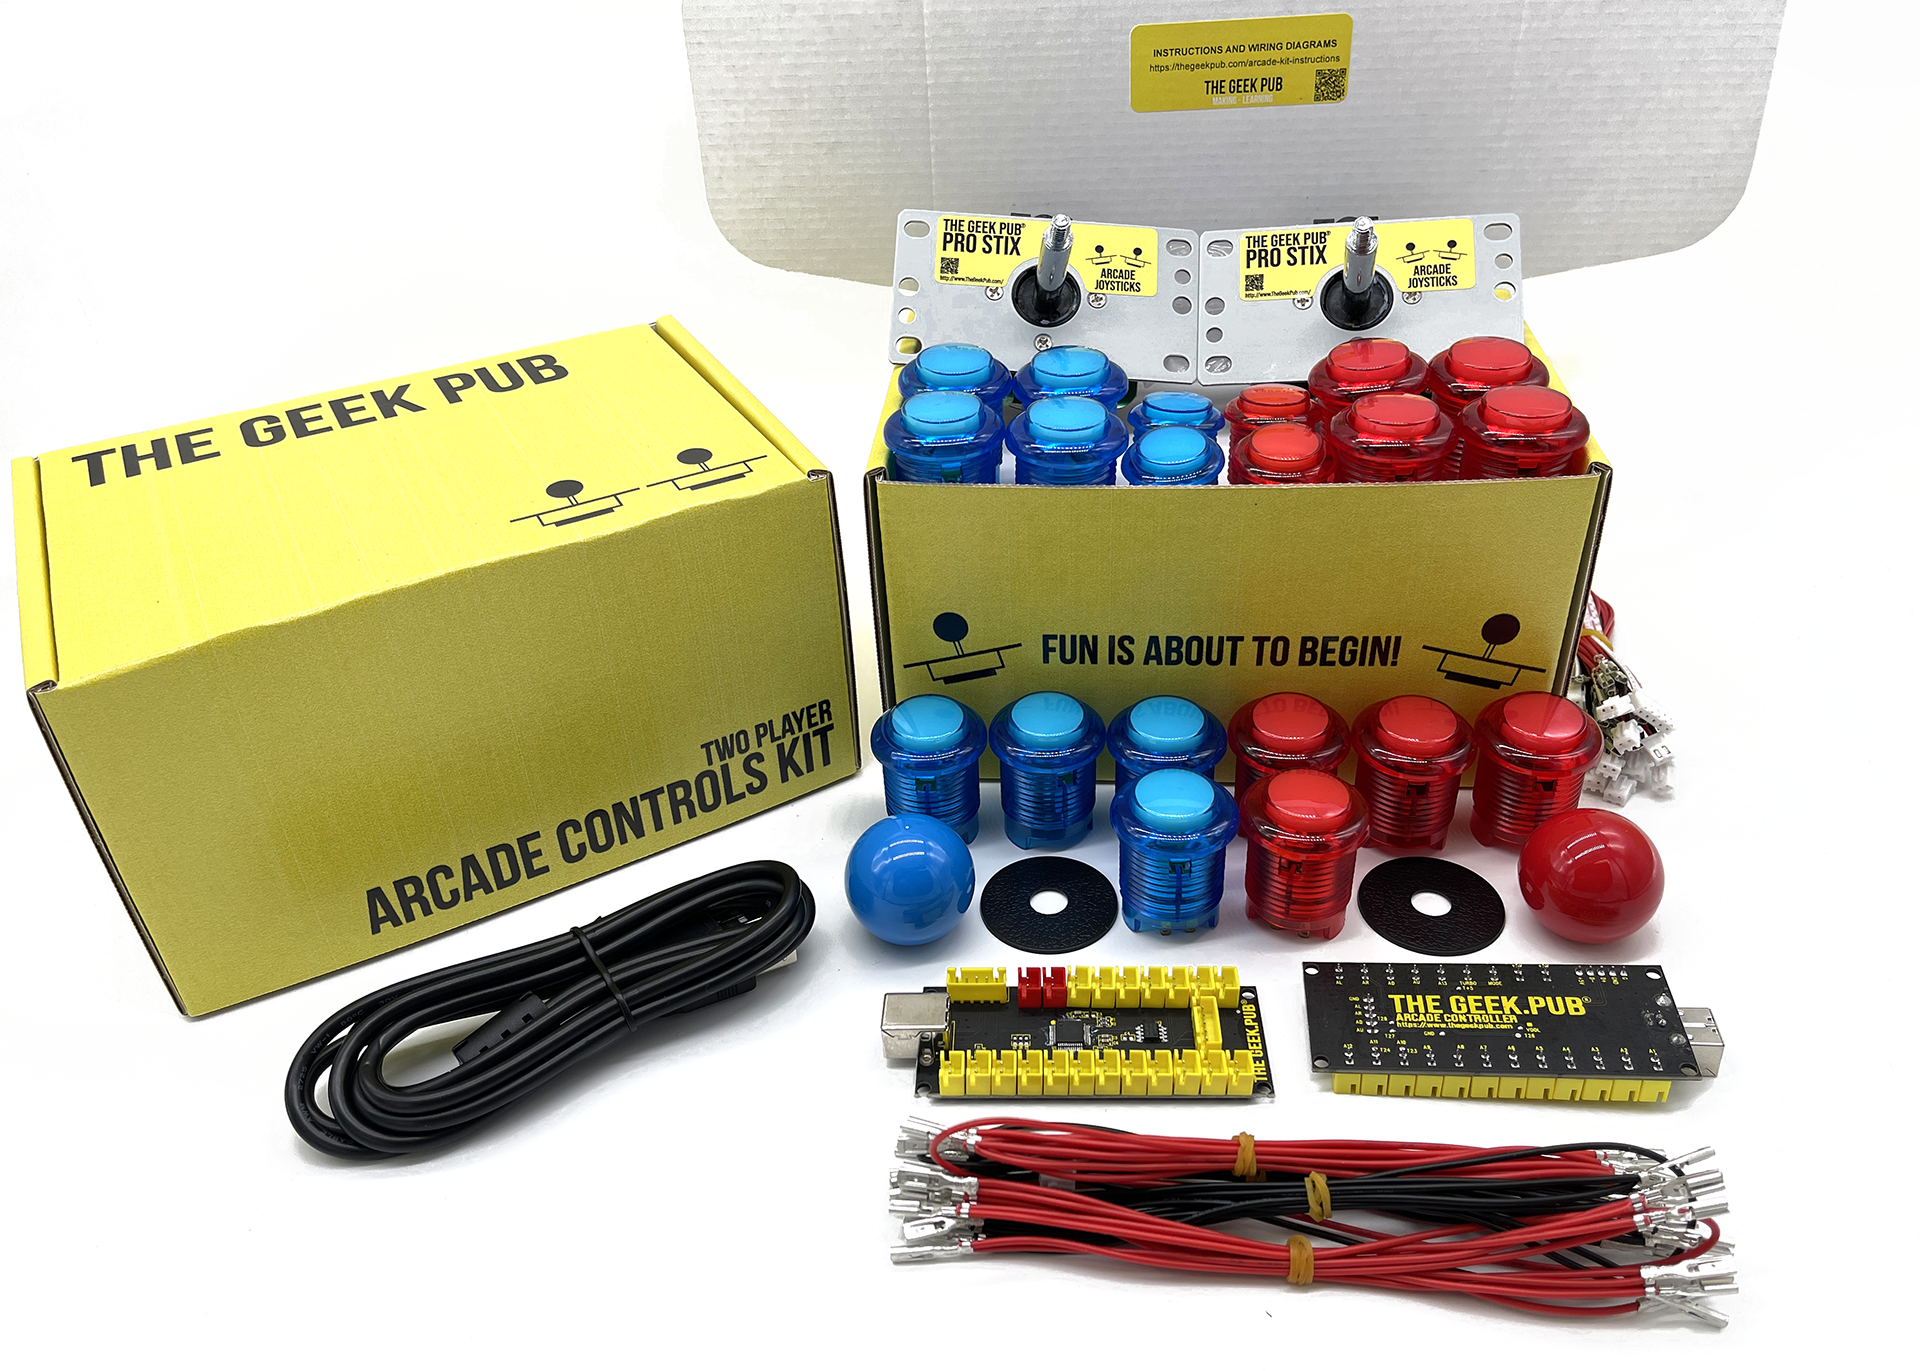 Blue-Red 2 Player Arcade Controls Kit by The Geek Pub